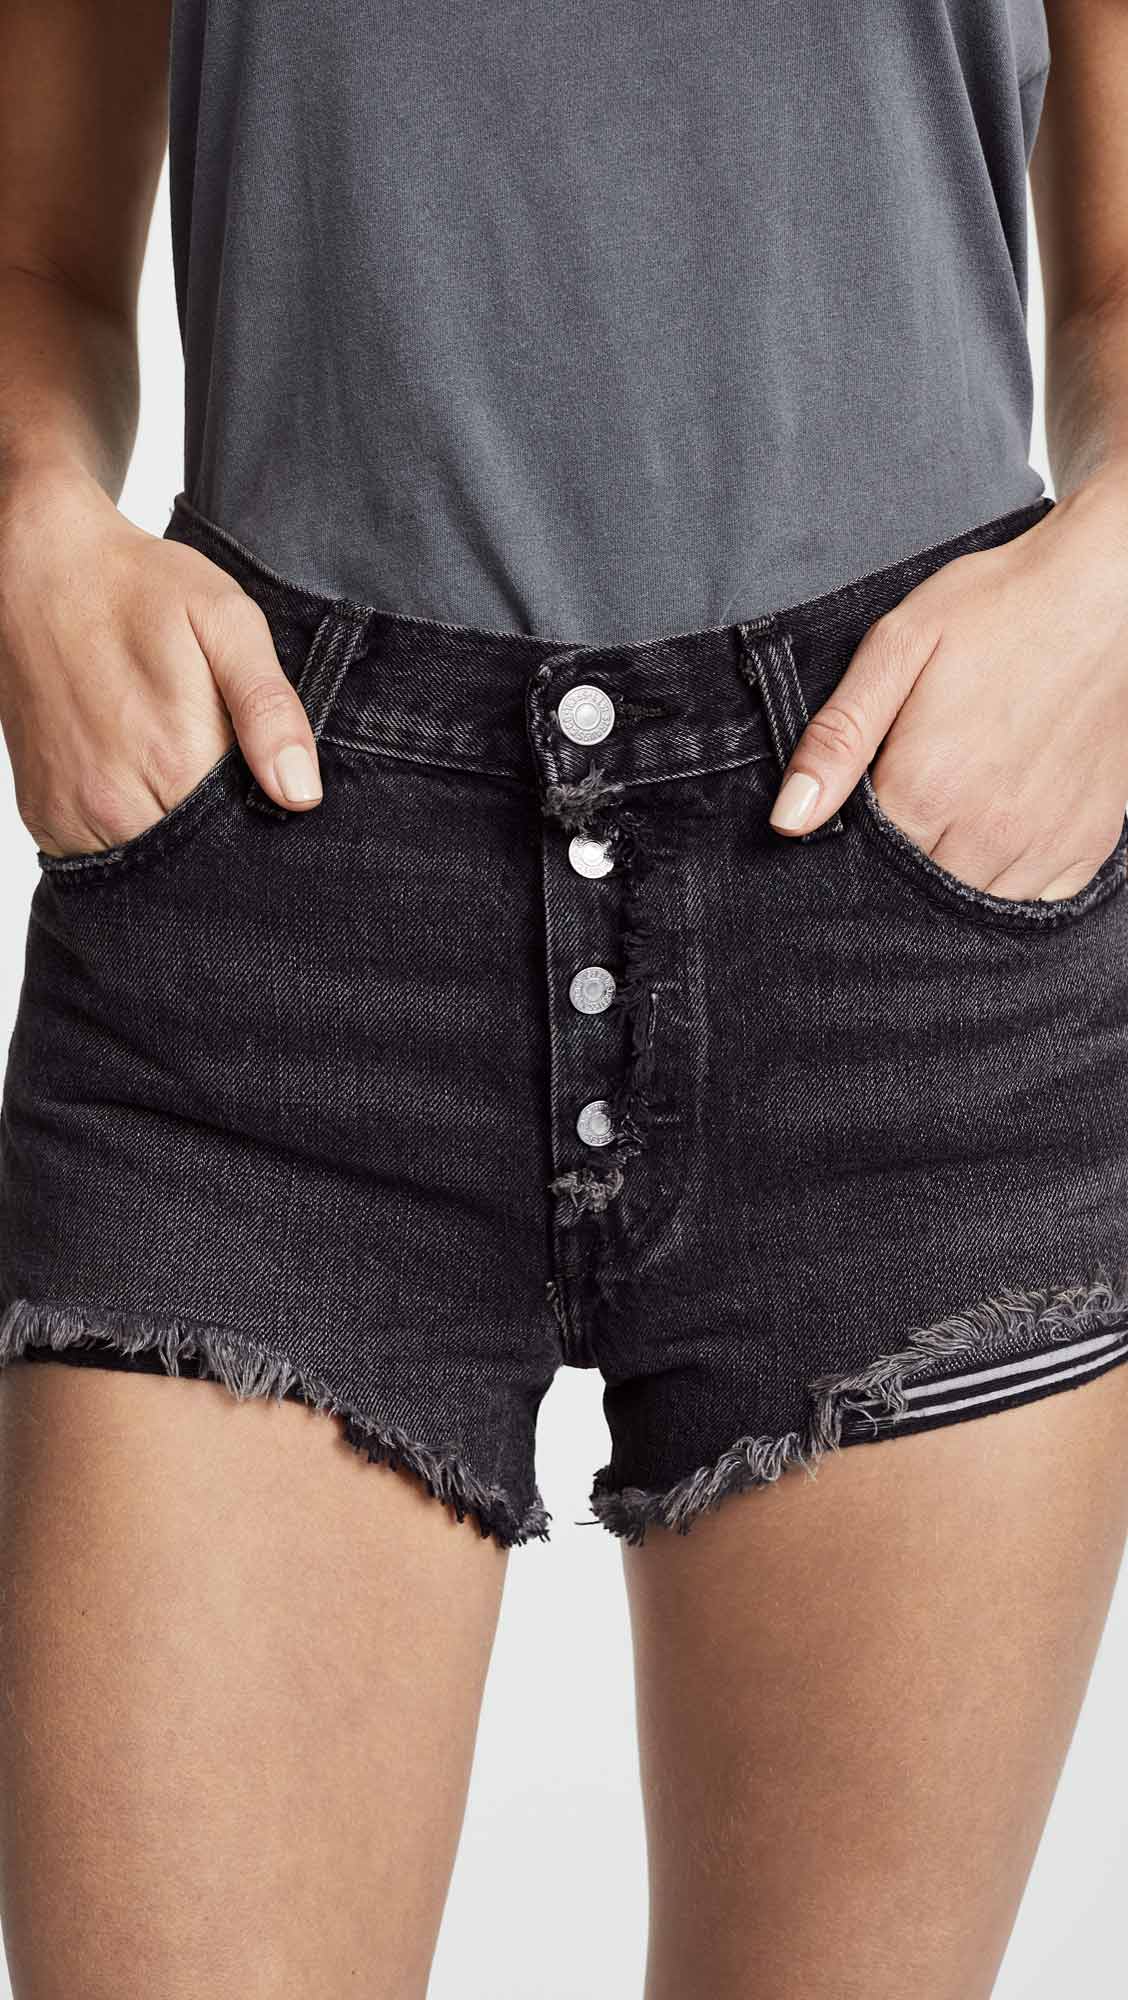 Find Of The Week: Levi’s 501 Denim Shorts in Black Eye - THE JEANS BLOG